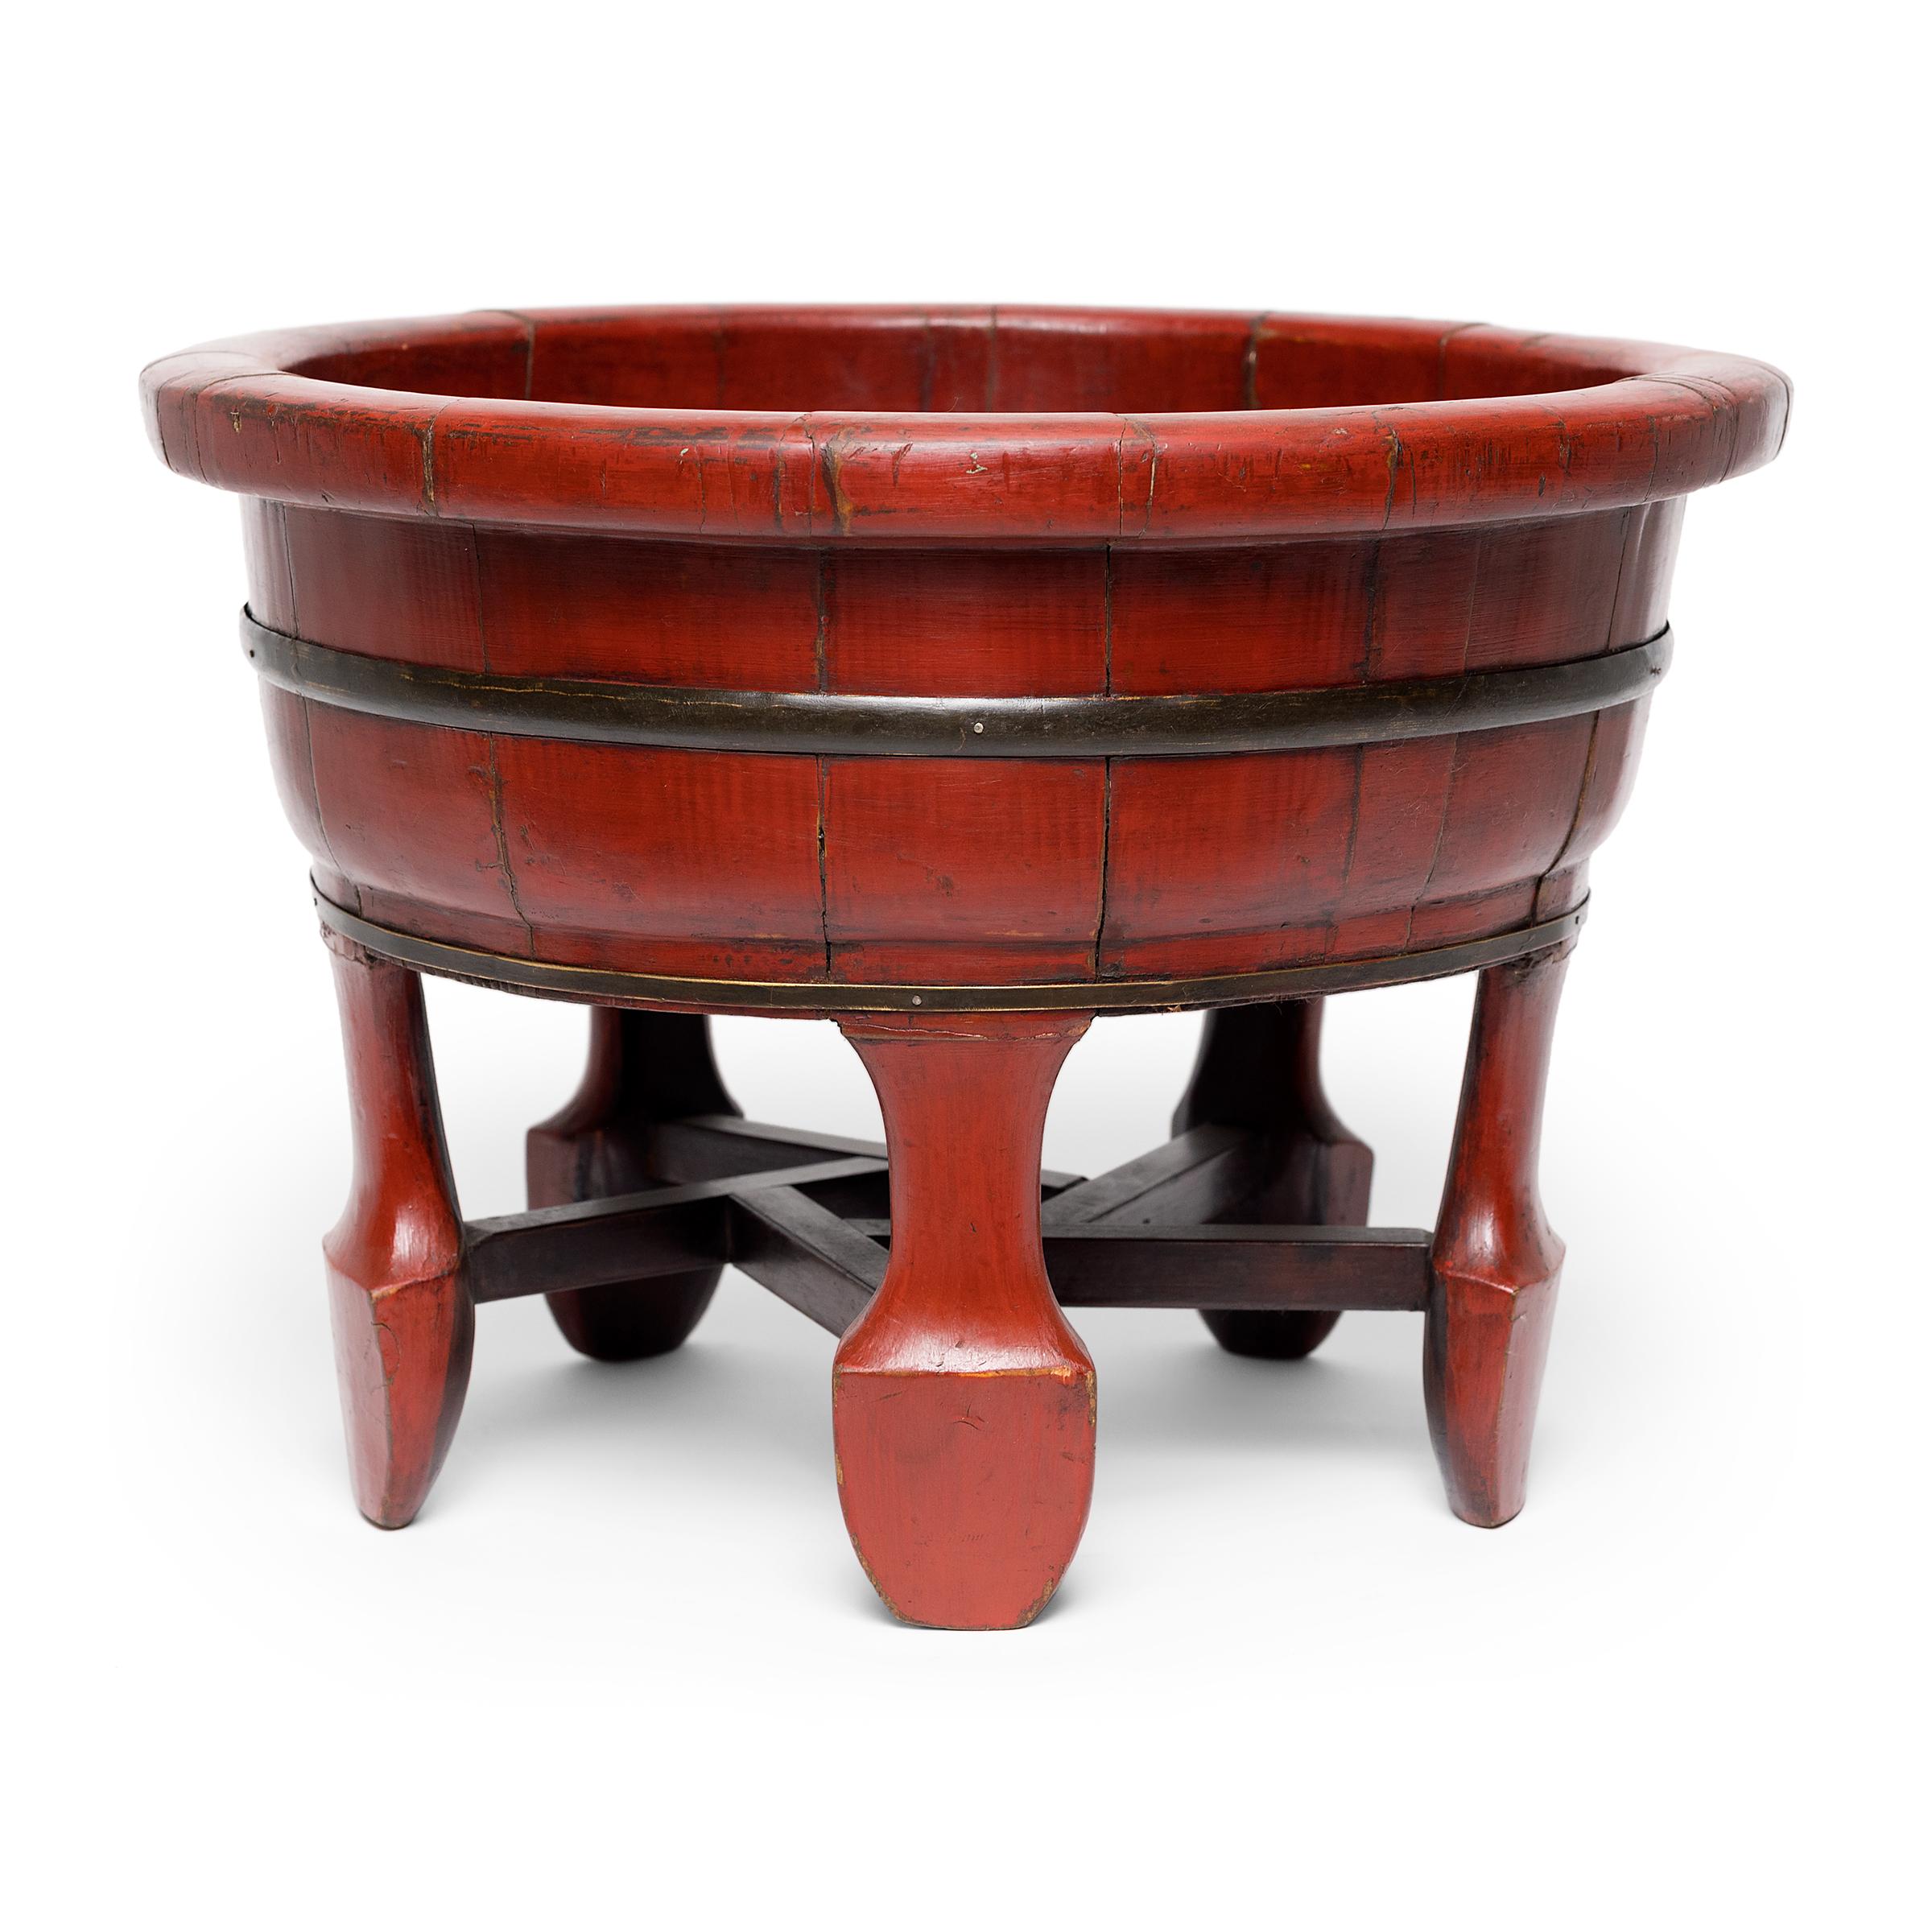 This raised lacquered vessel dates to the late 19th century and was originally used as an elevated wash basin or a child's bathtub. The round basin is raised on a footed base with five spade-form legs linked by interlocking stretchers. The tub is